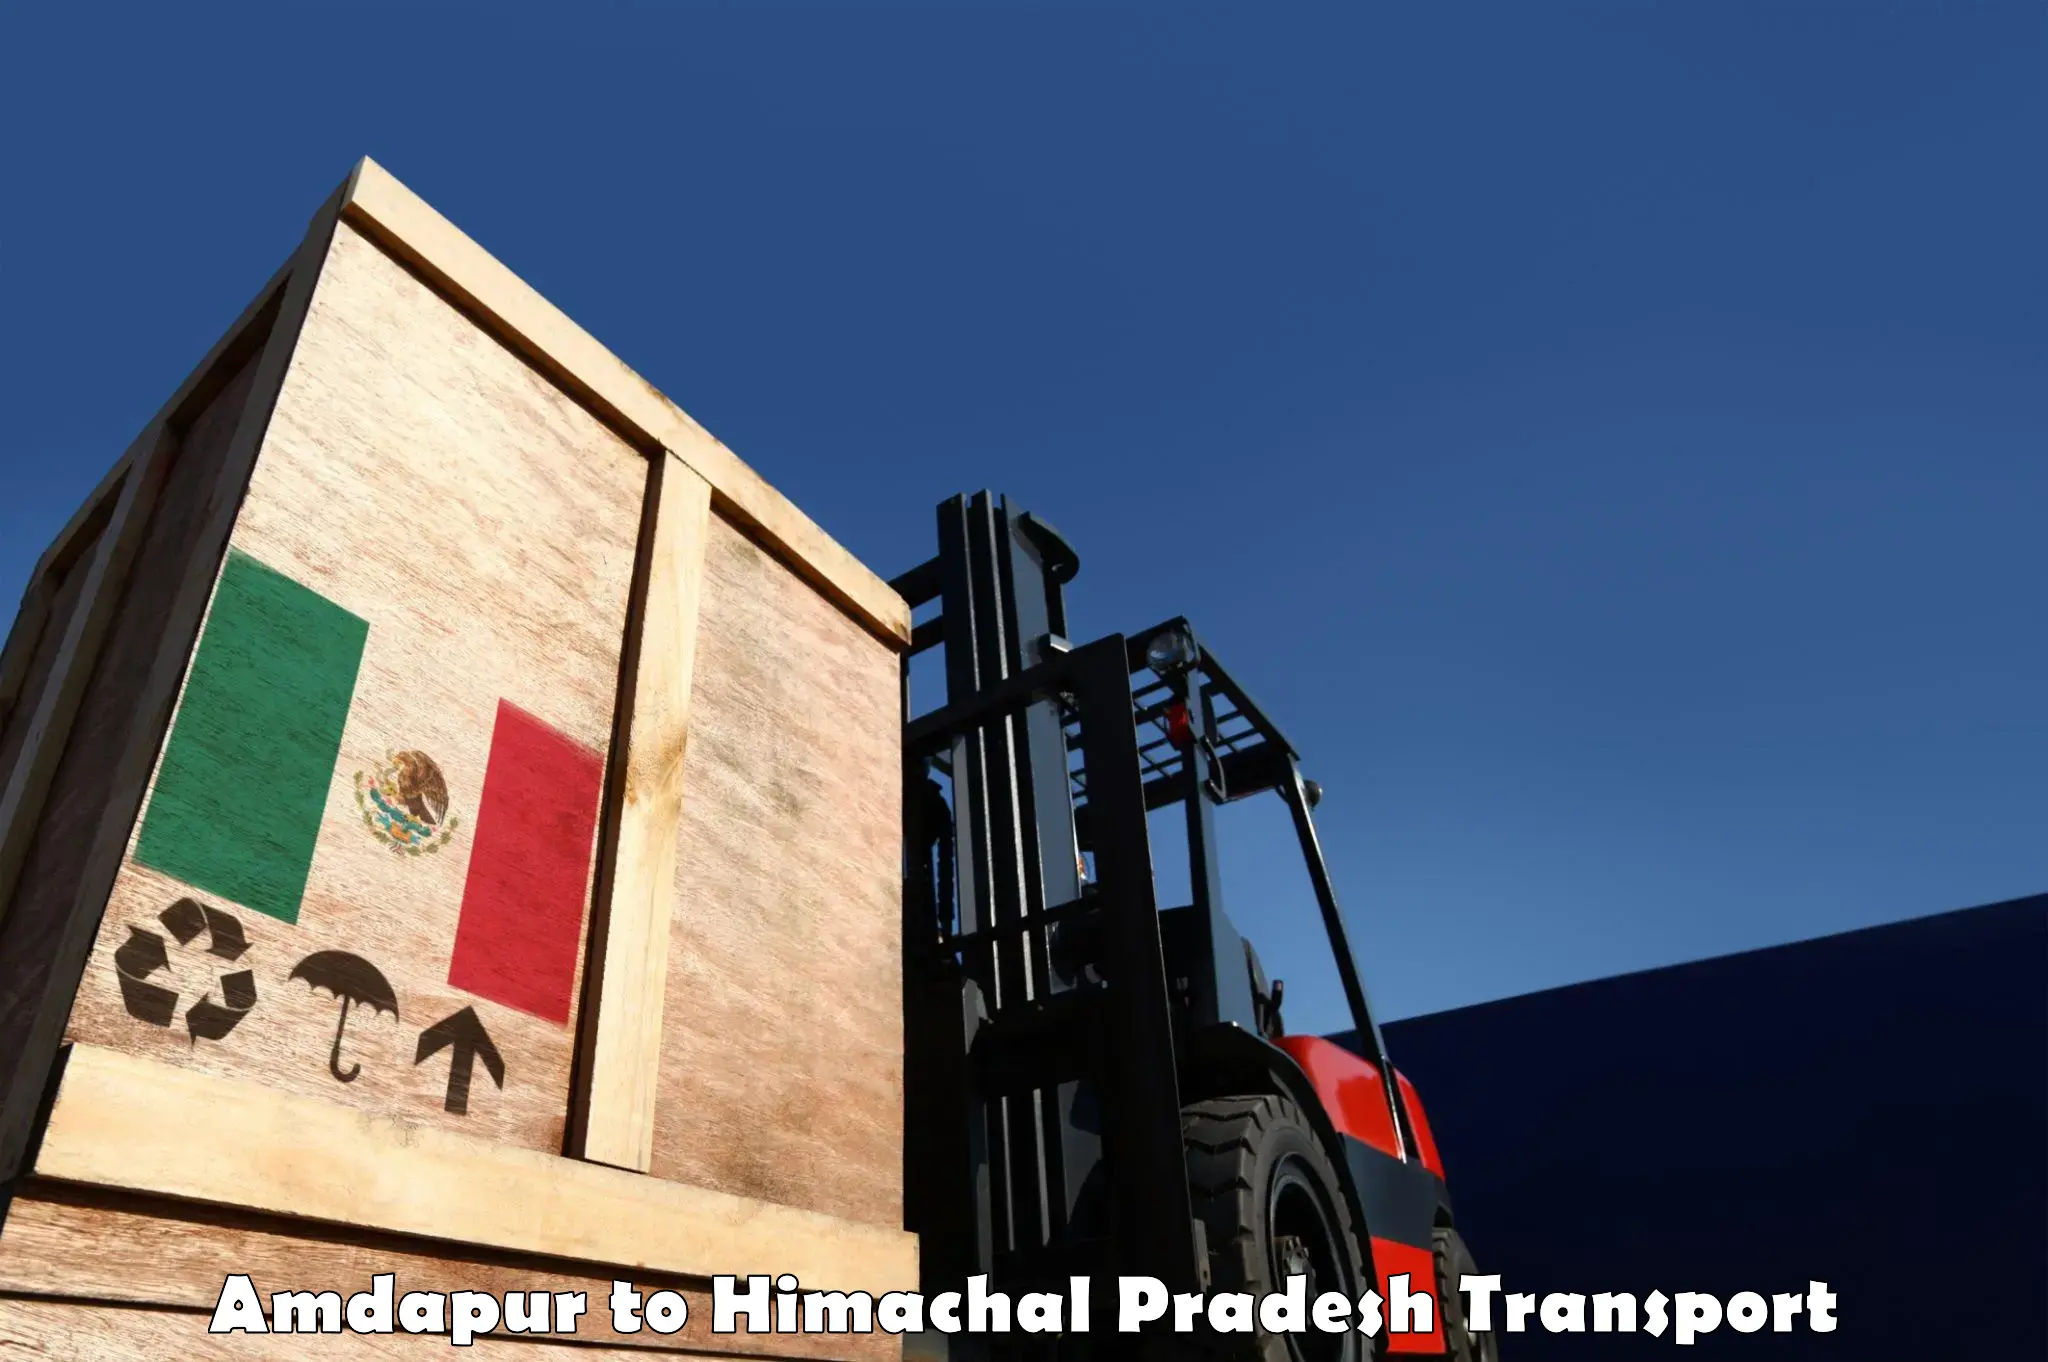 Commercial transport service Amdapur to Kandaghat